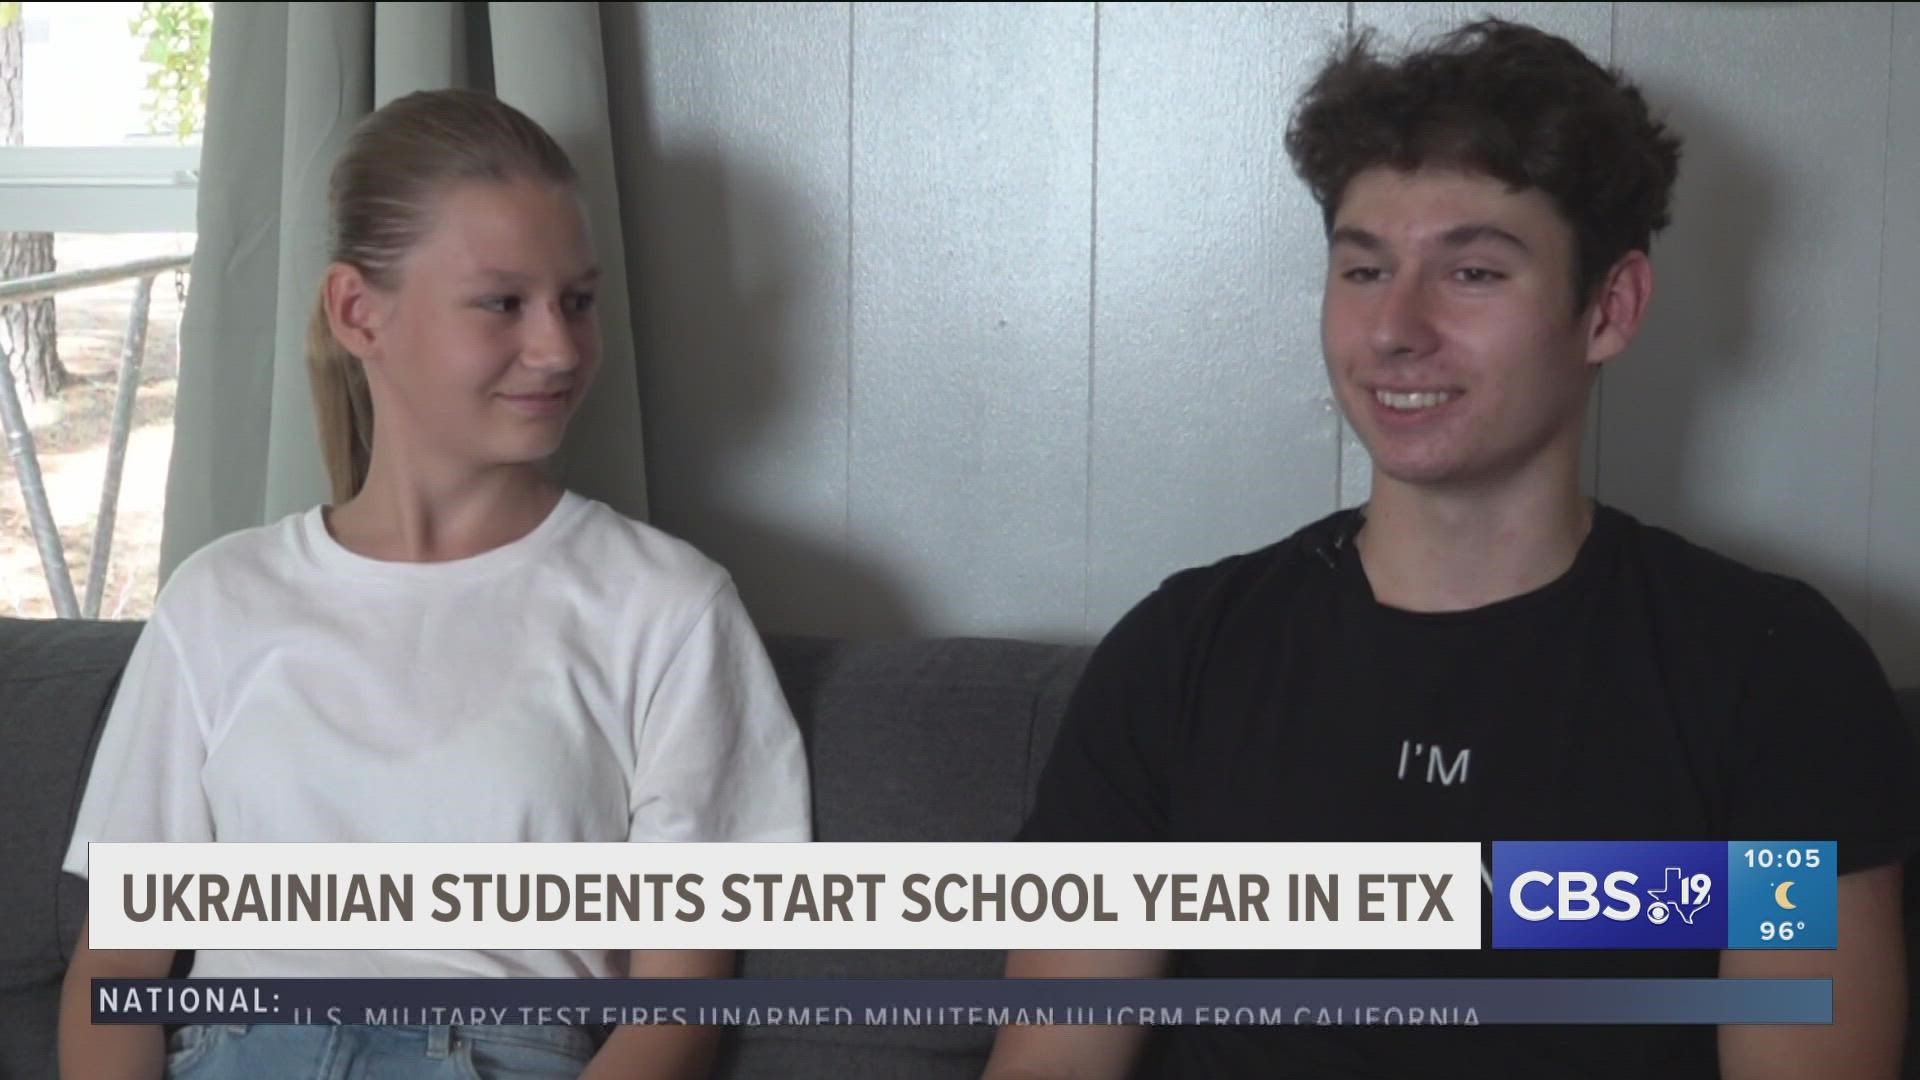 Gleb and Luba fled from war in March. Wednesday, they start a brand-new school year in America.